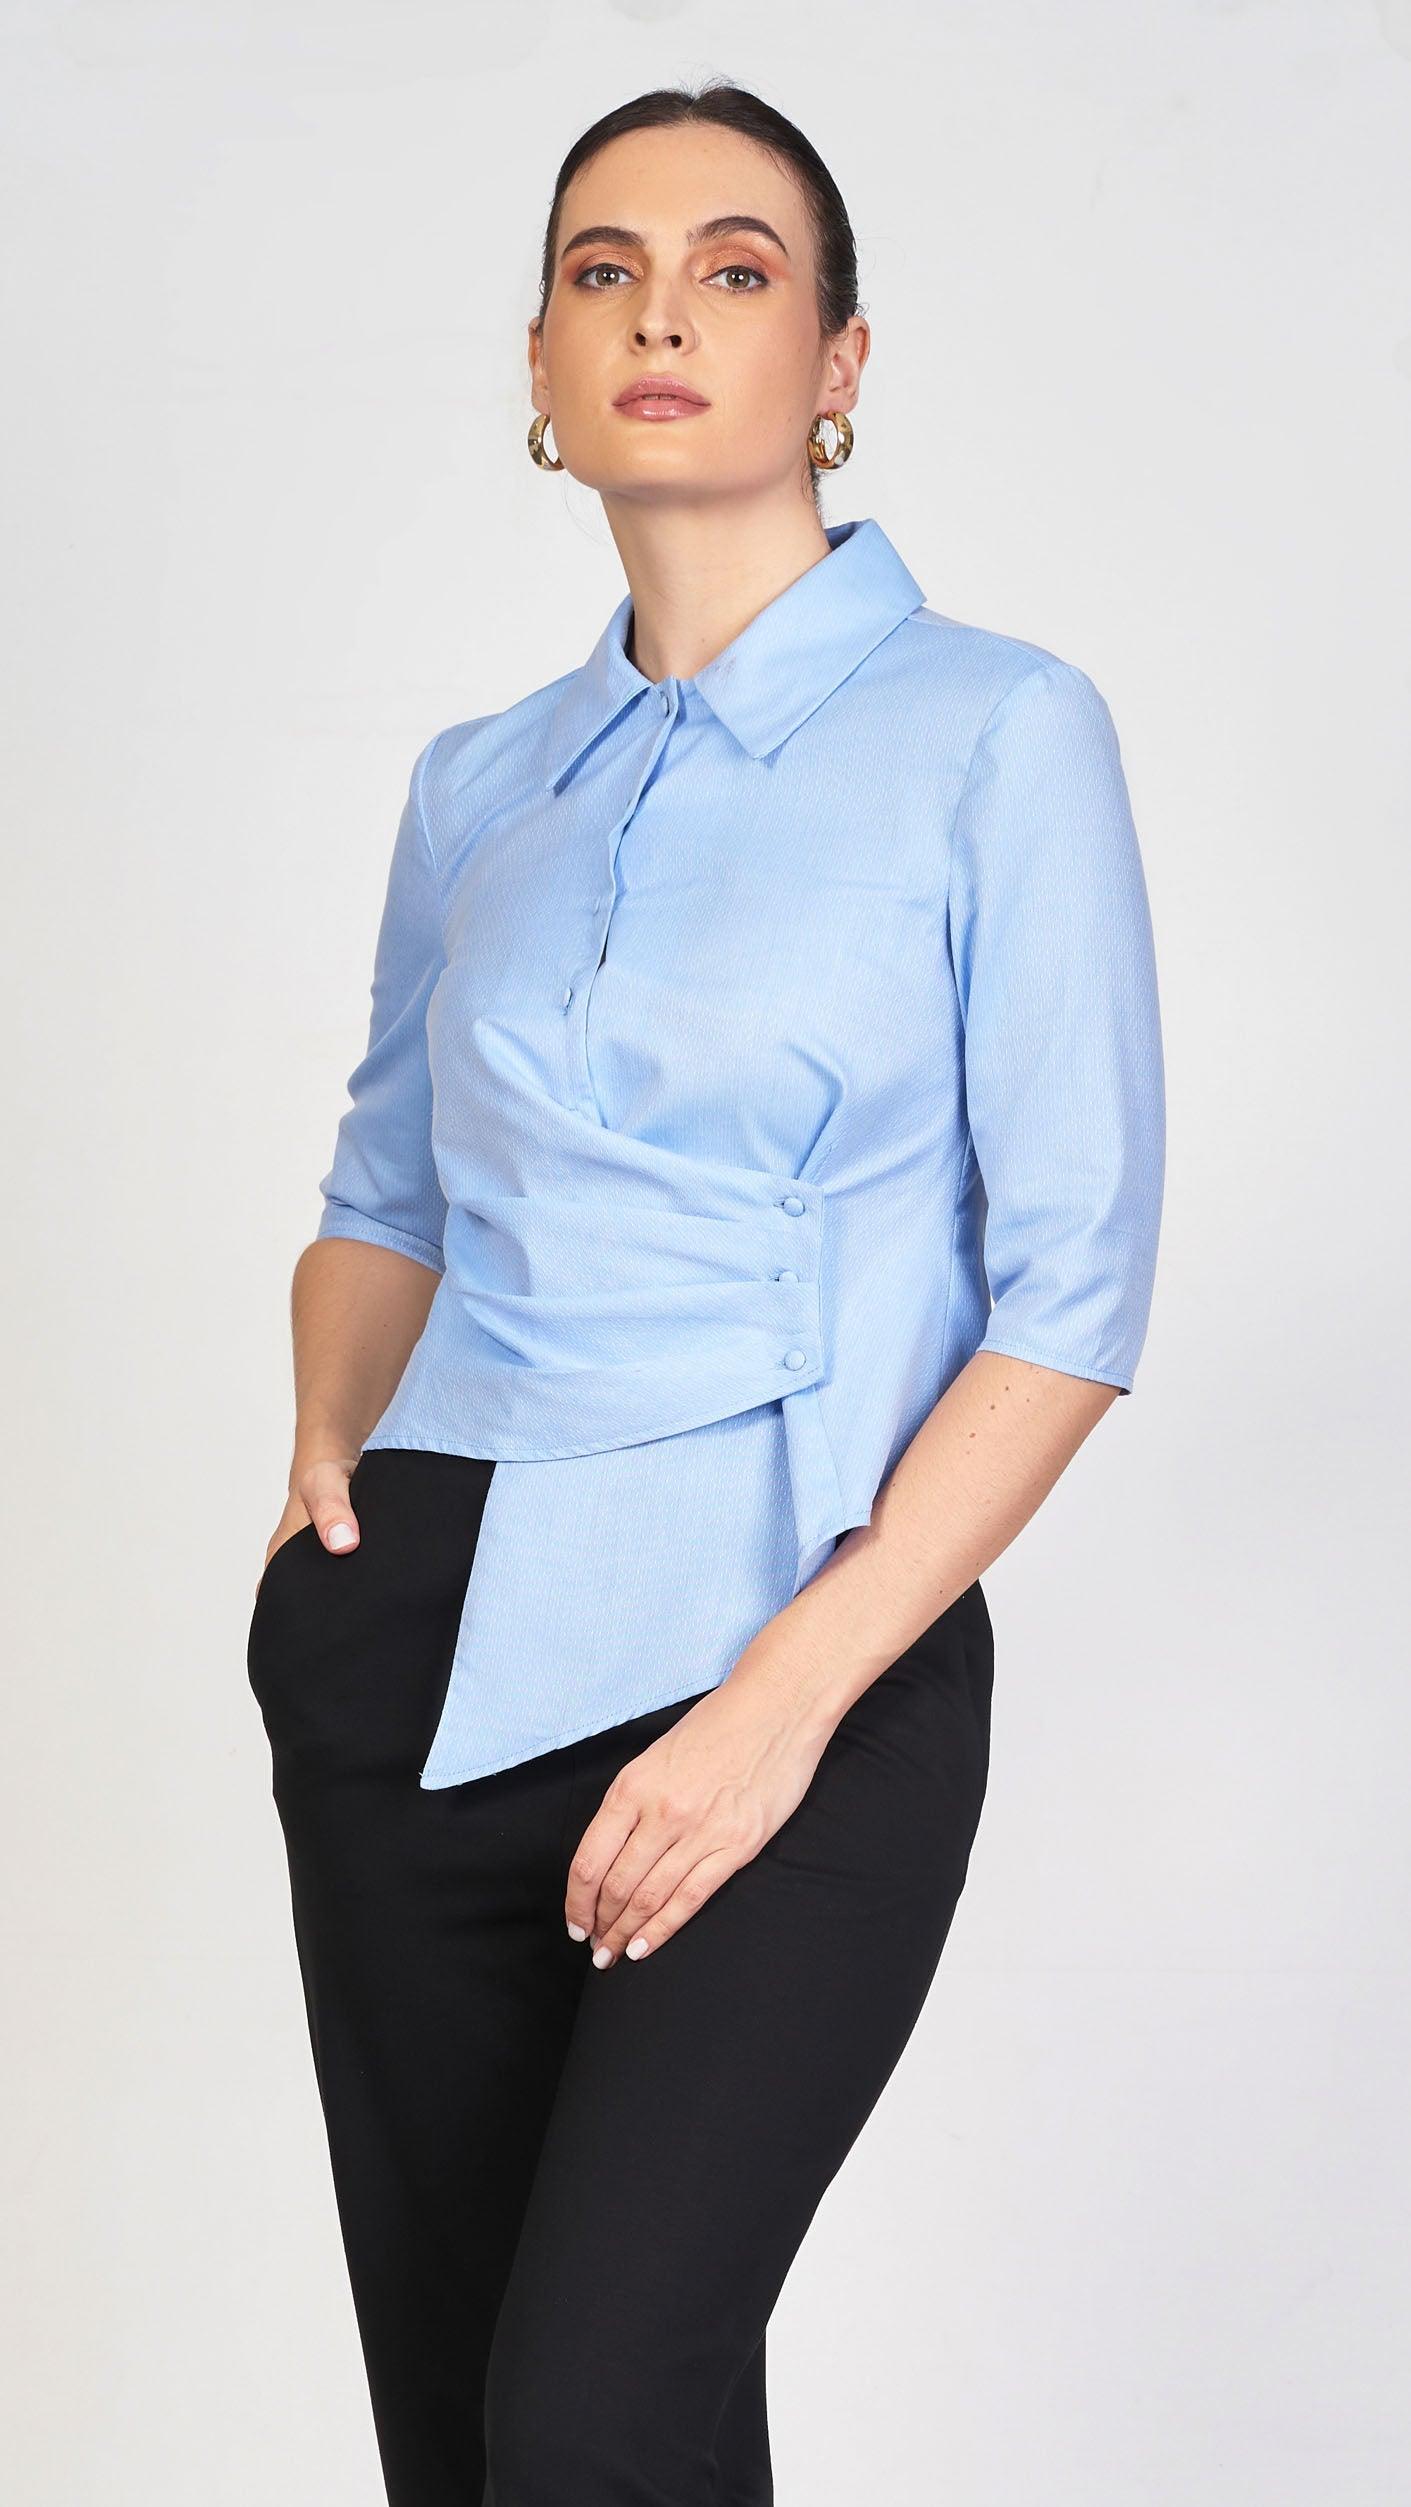 Clinched button detail top - Avirate Sri Lanka